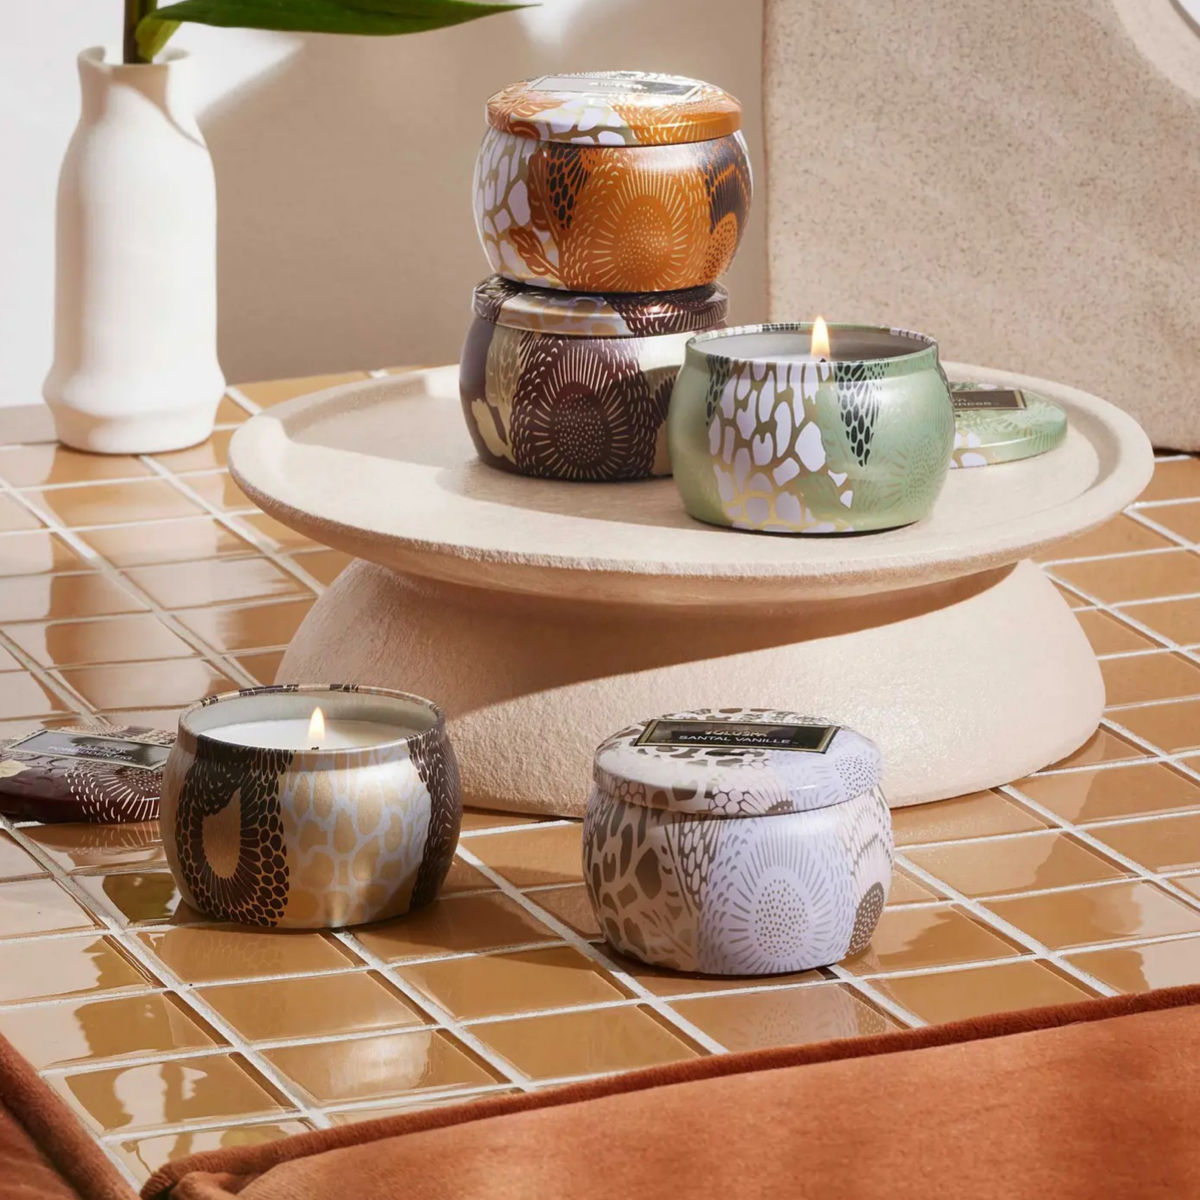 Nordstrom Anniversary Sale 2018 Picks - Tea with MD